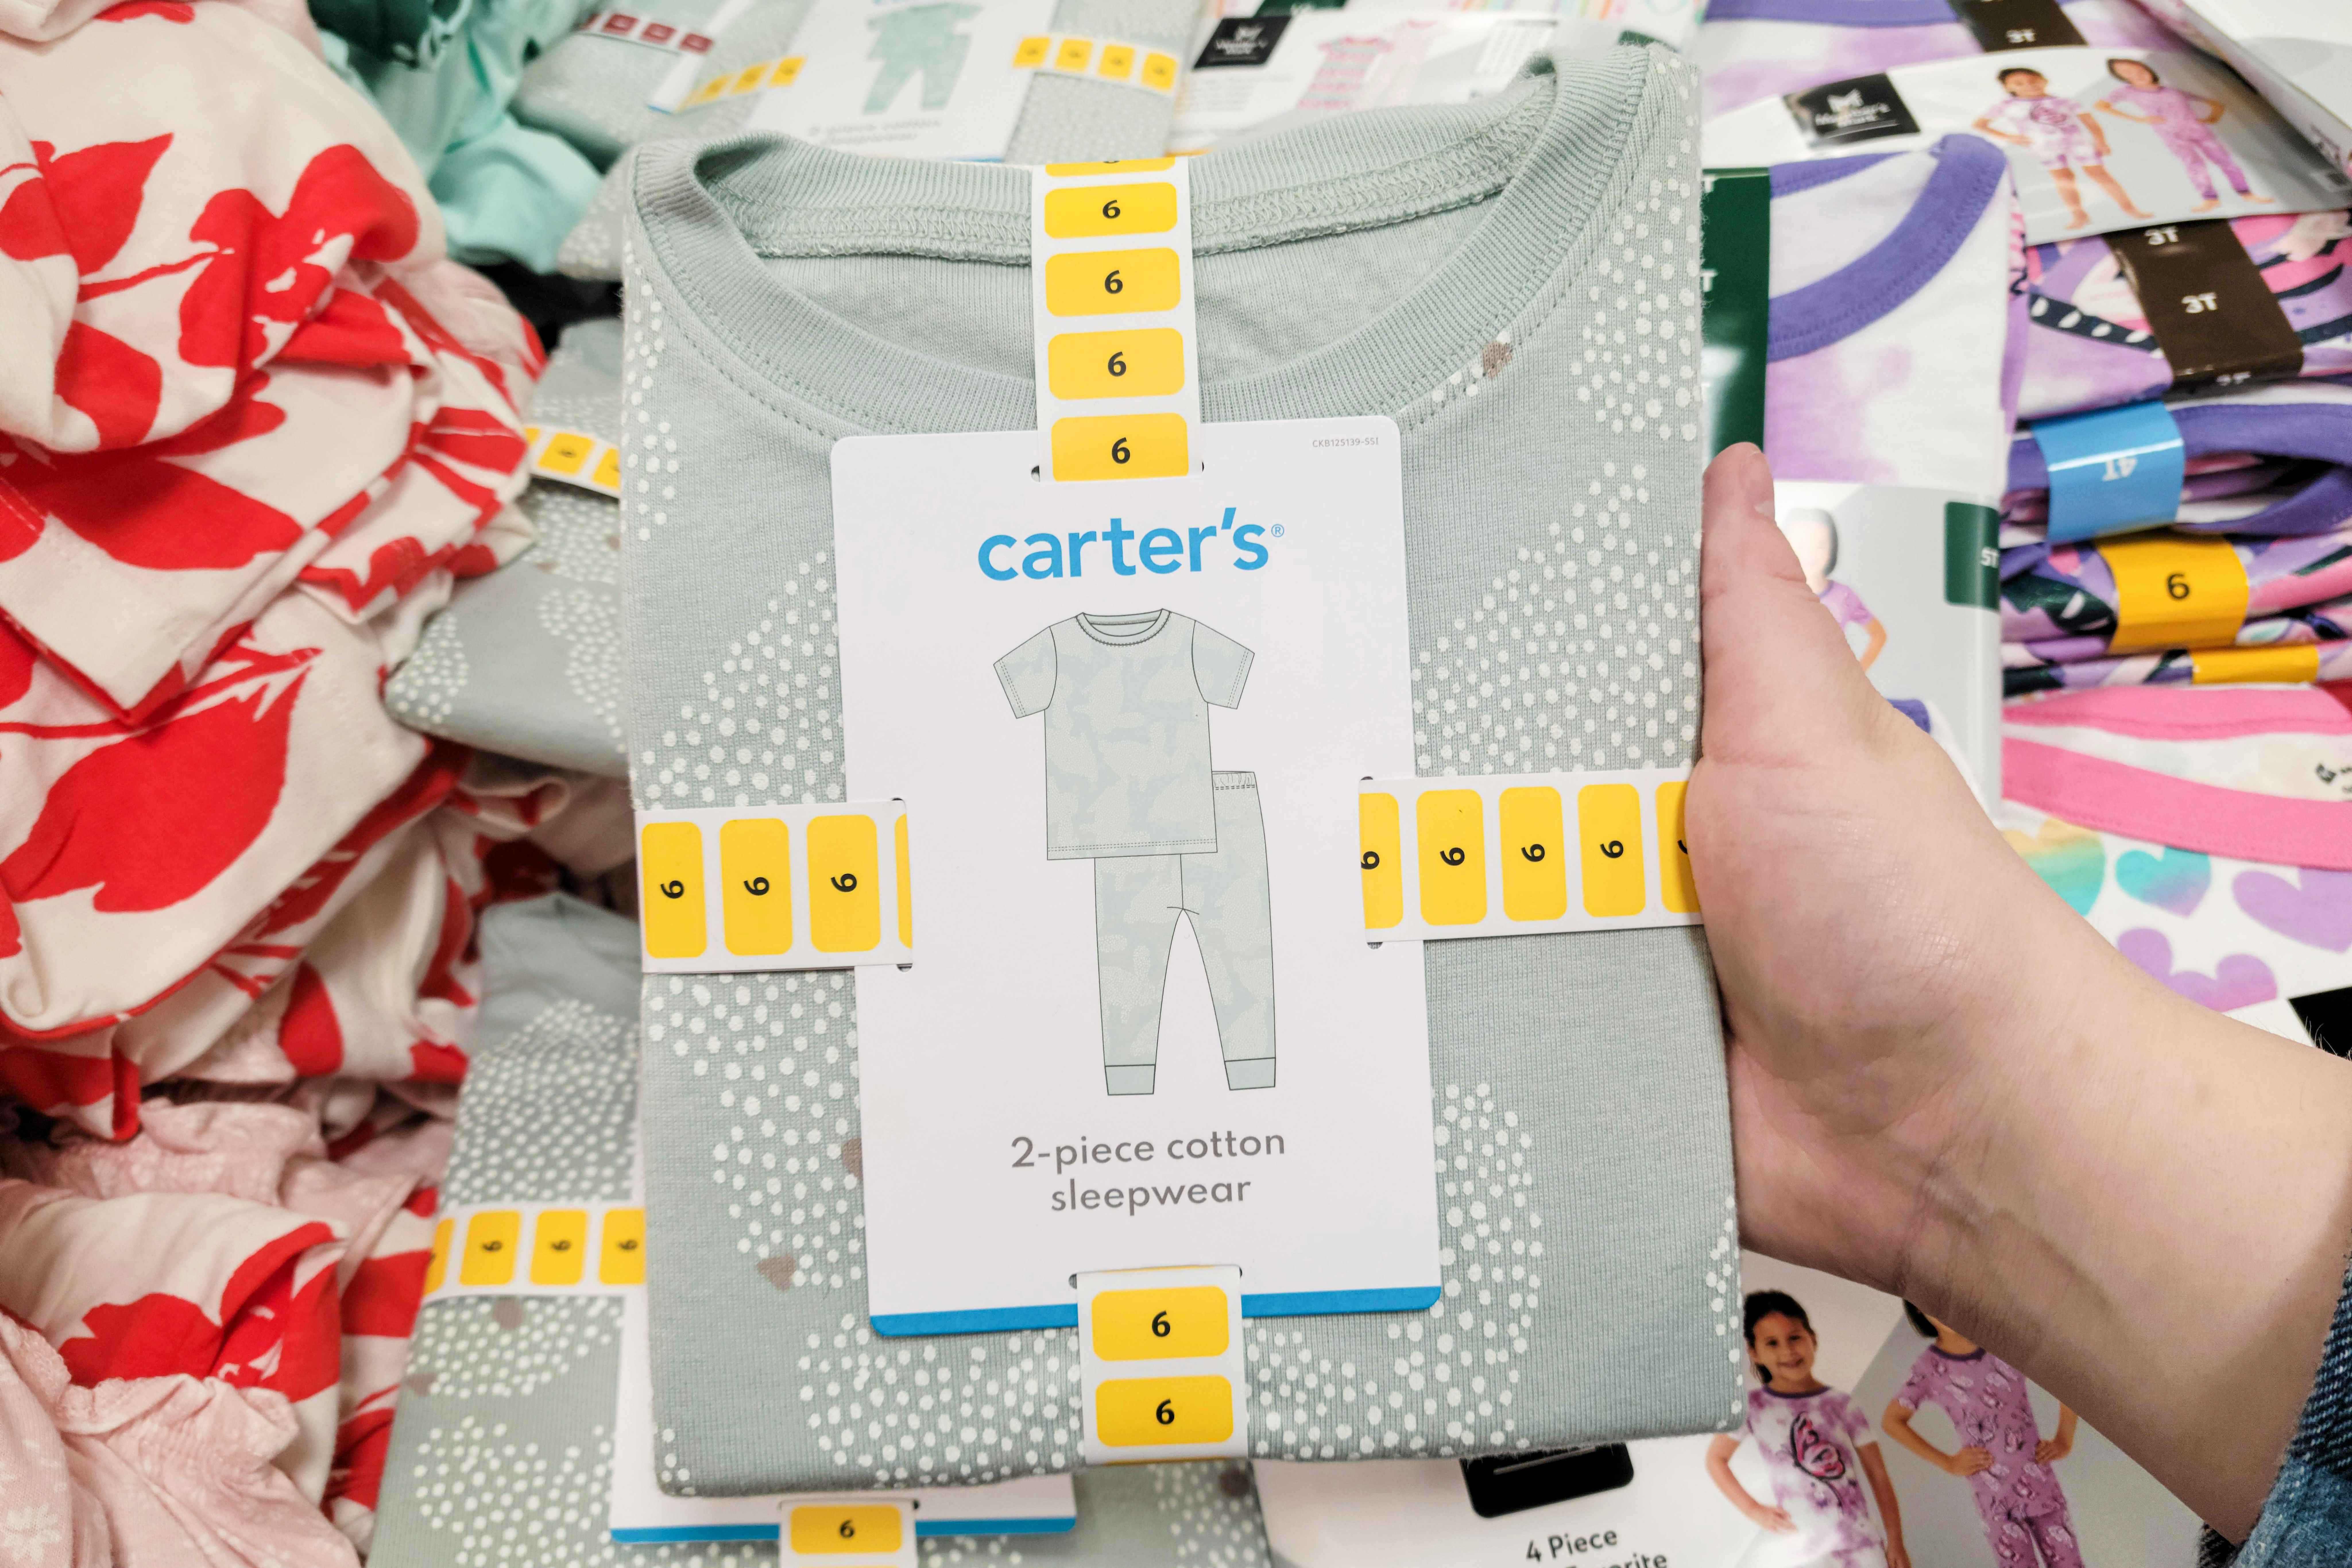 Carter's, Hurley, and Member's Mark Clothing, as Low as $3.81 at Sam's Club